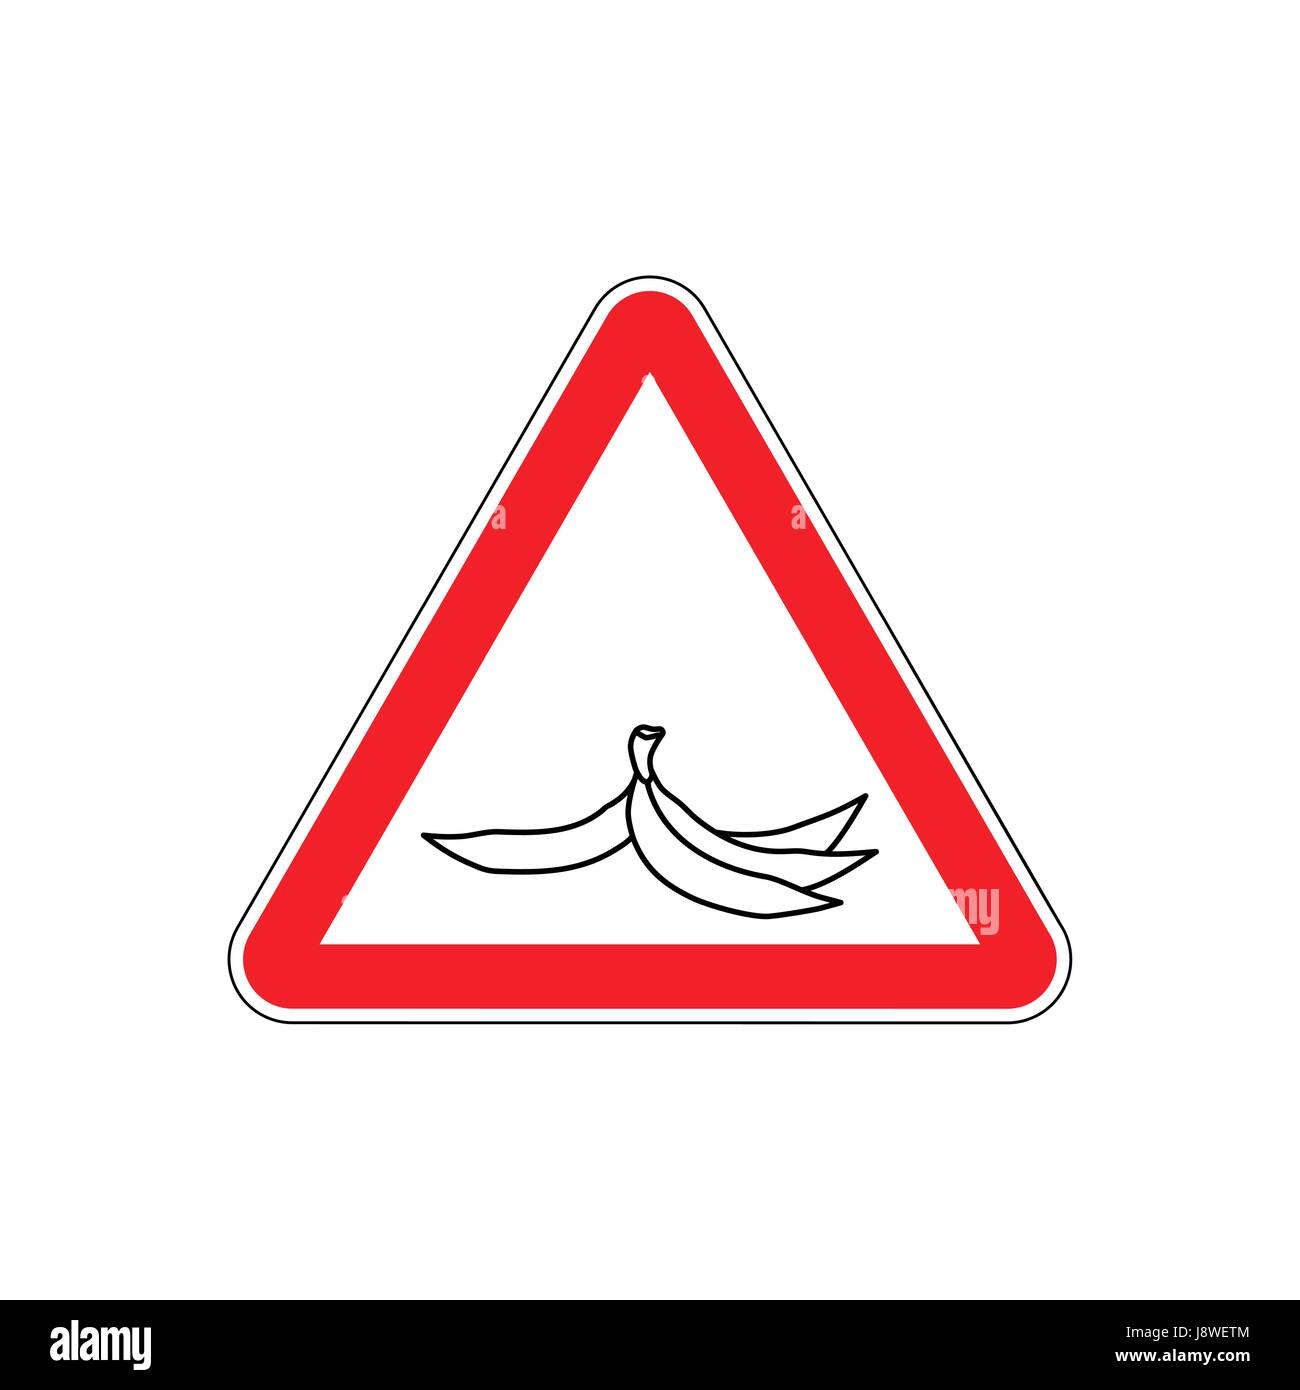 Attention garbage. Peel from banana on red triangle. Road sign Caution trash Stock Vector